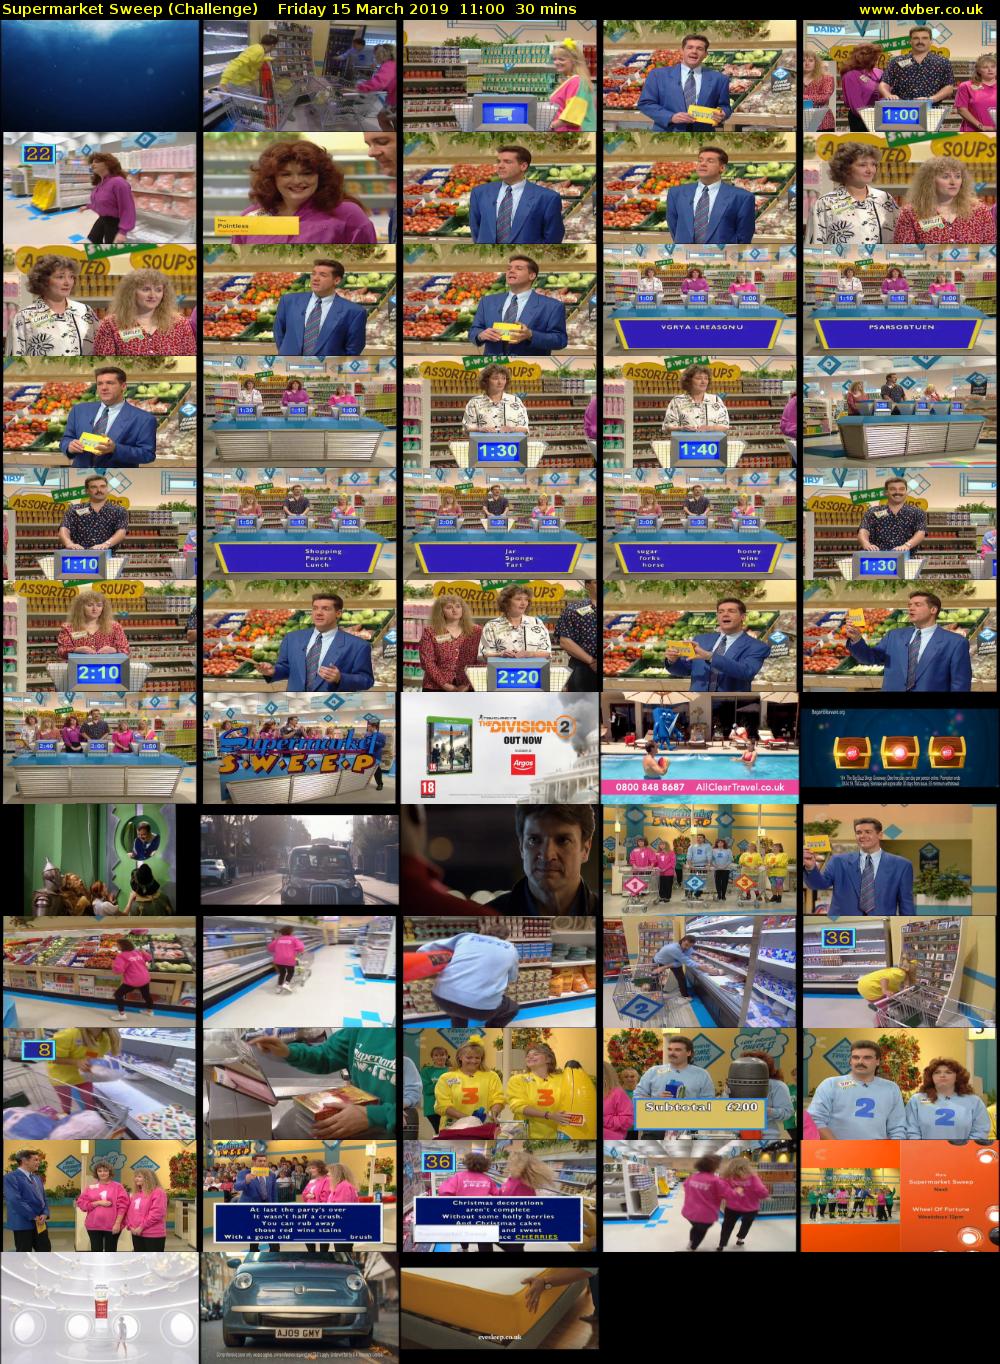 Supermarket Sweep (Challenge) Friday 15 March 2019 11:00 - 11:30